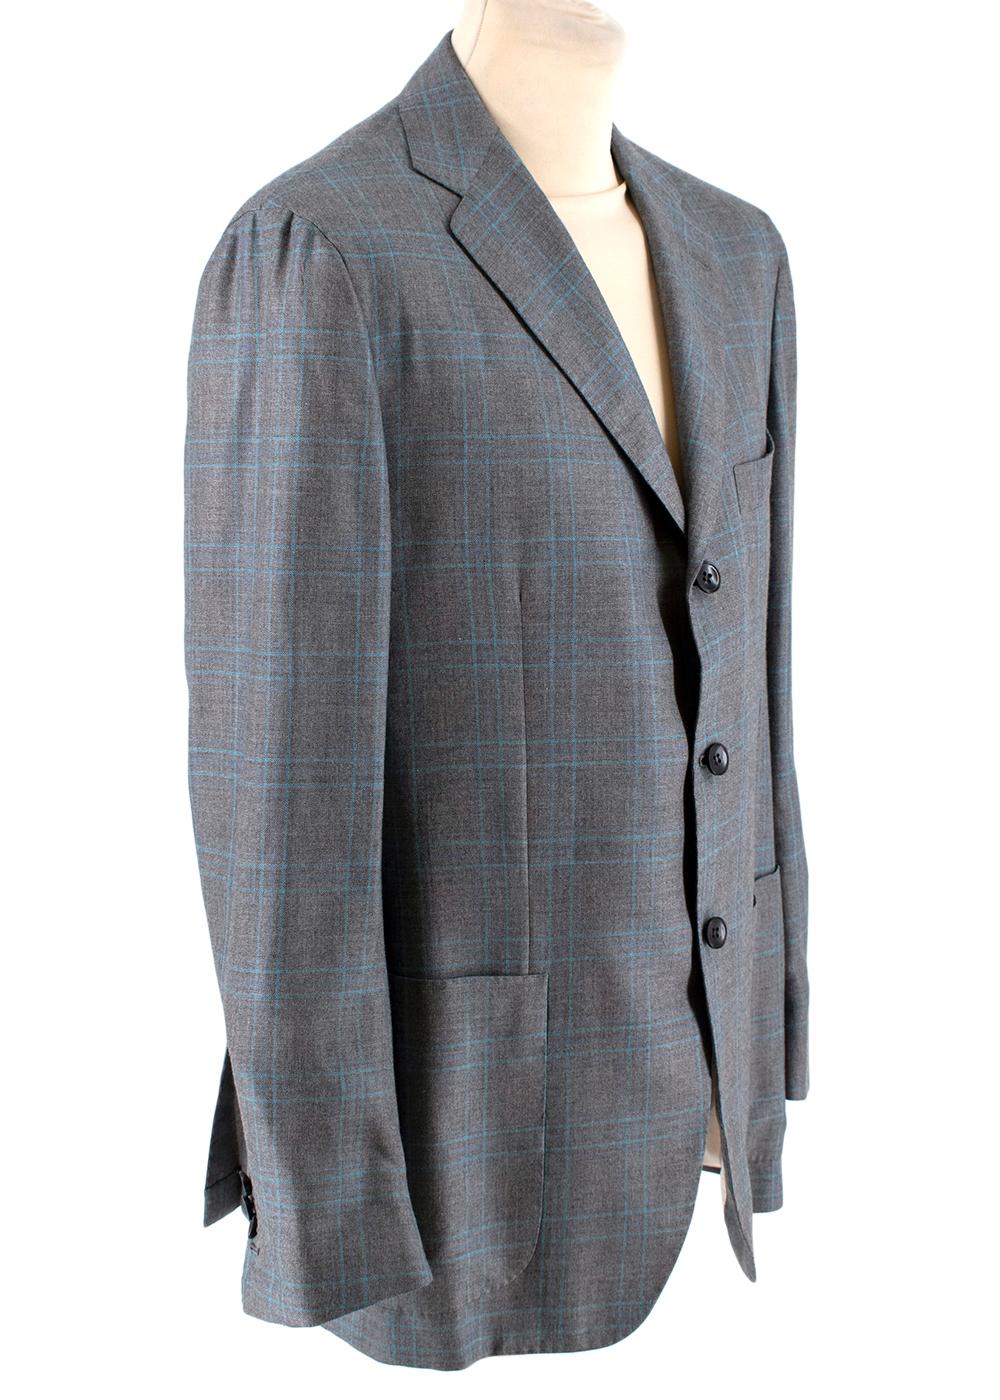 Kiton Napoli Grey & Blue Checked Cashmere & Silk Jacket
-Soft cashmere and silk blend material
-Three pockets on front
-Three button enclosures down front
-Three interior pockets
-Four buttons on cuffs
-Notched lapels
-Partially lined
-Vents on